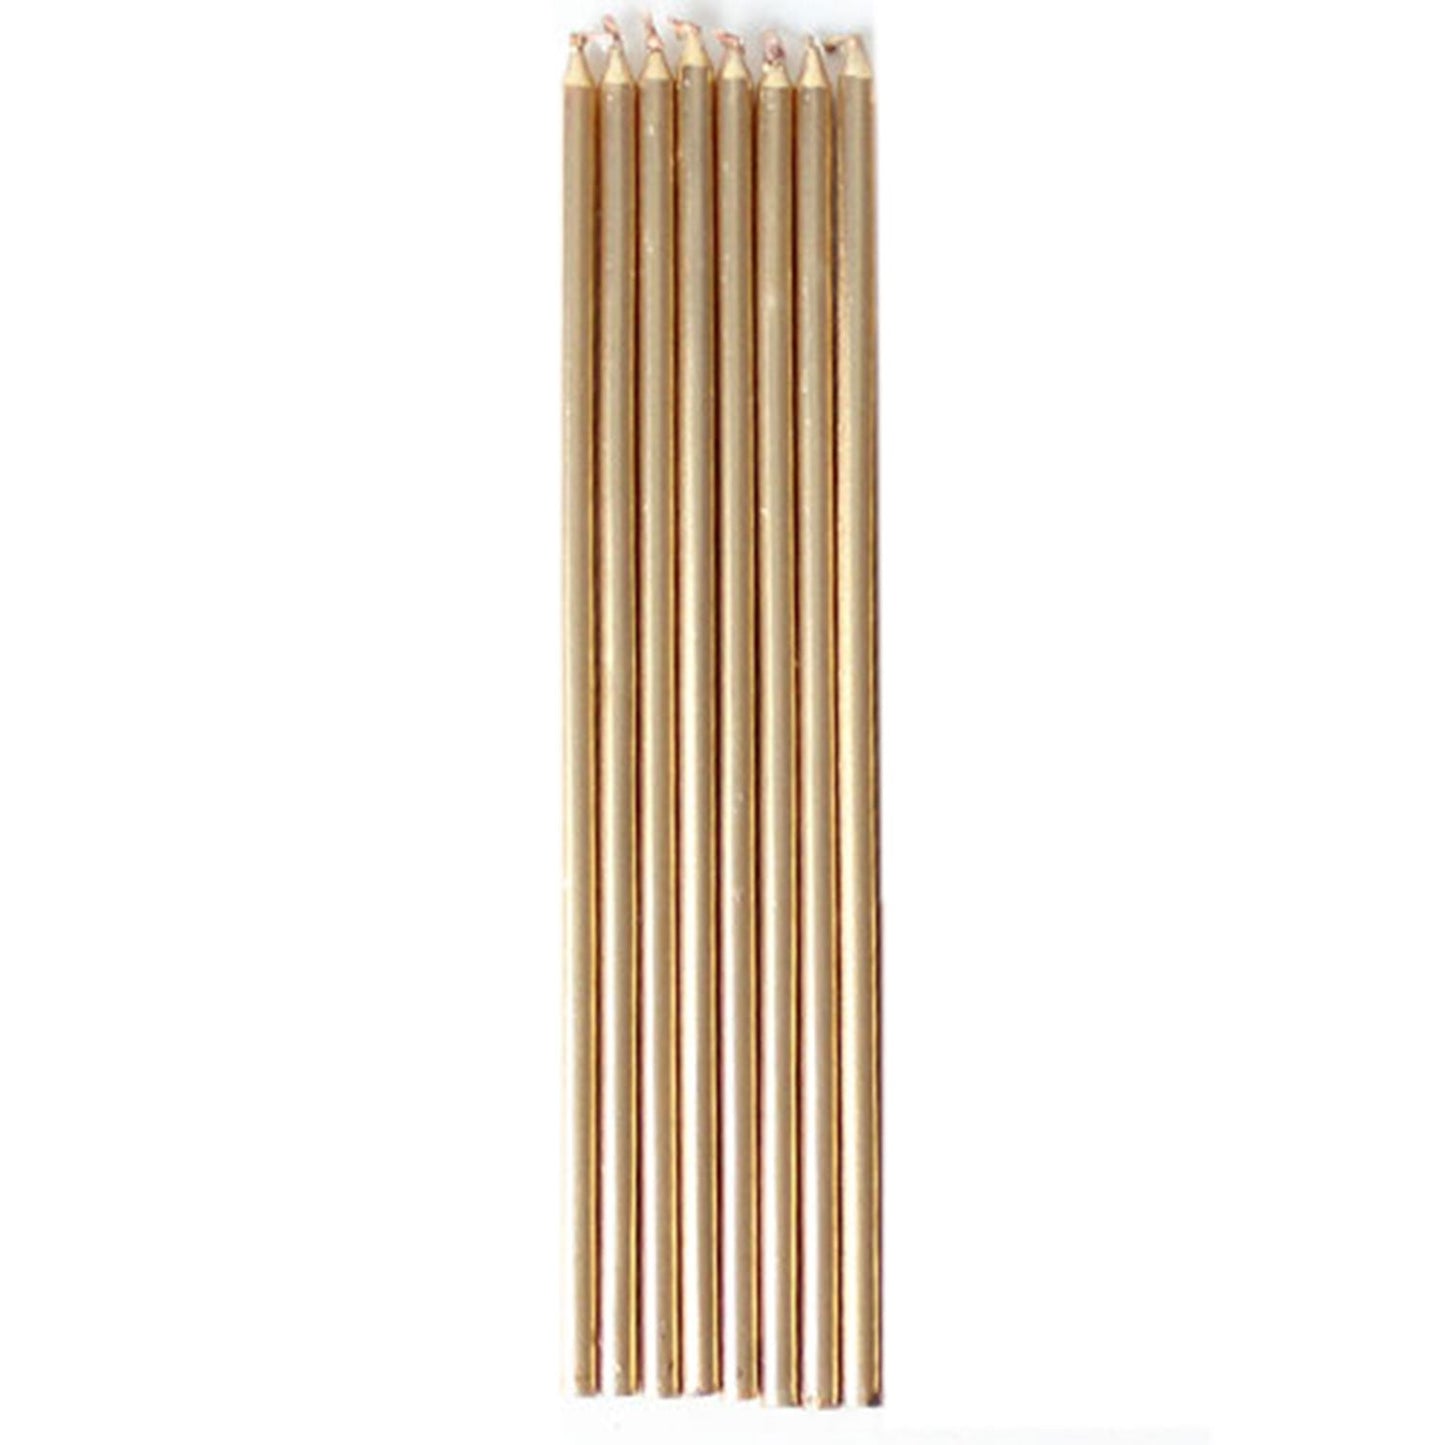 16cm Metallic Gold Candles, Pack of 12